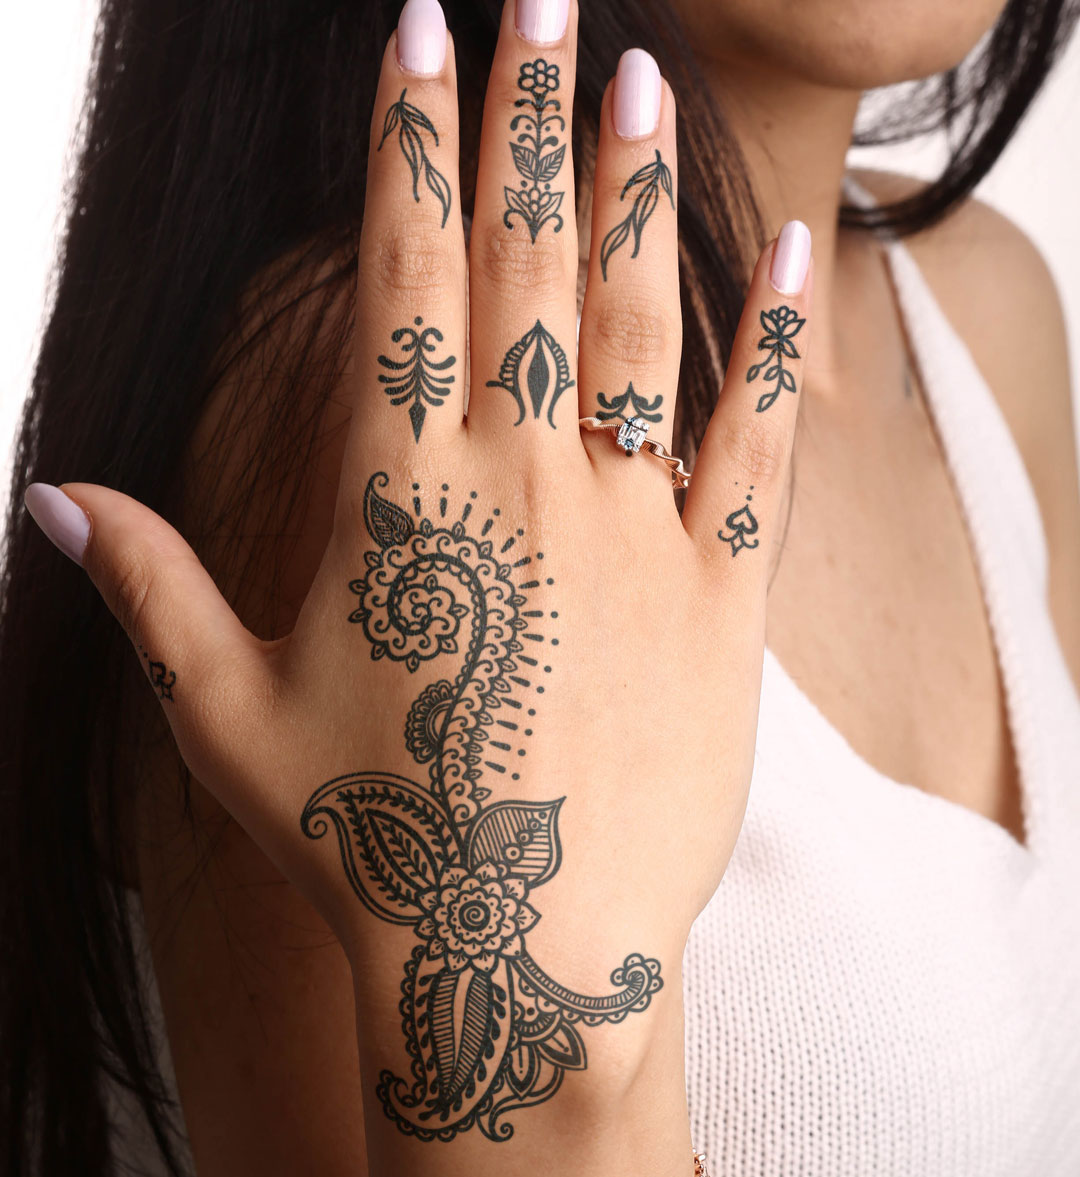 How long does it take to get a henna tattoo on both hands? - Quora